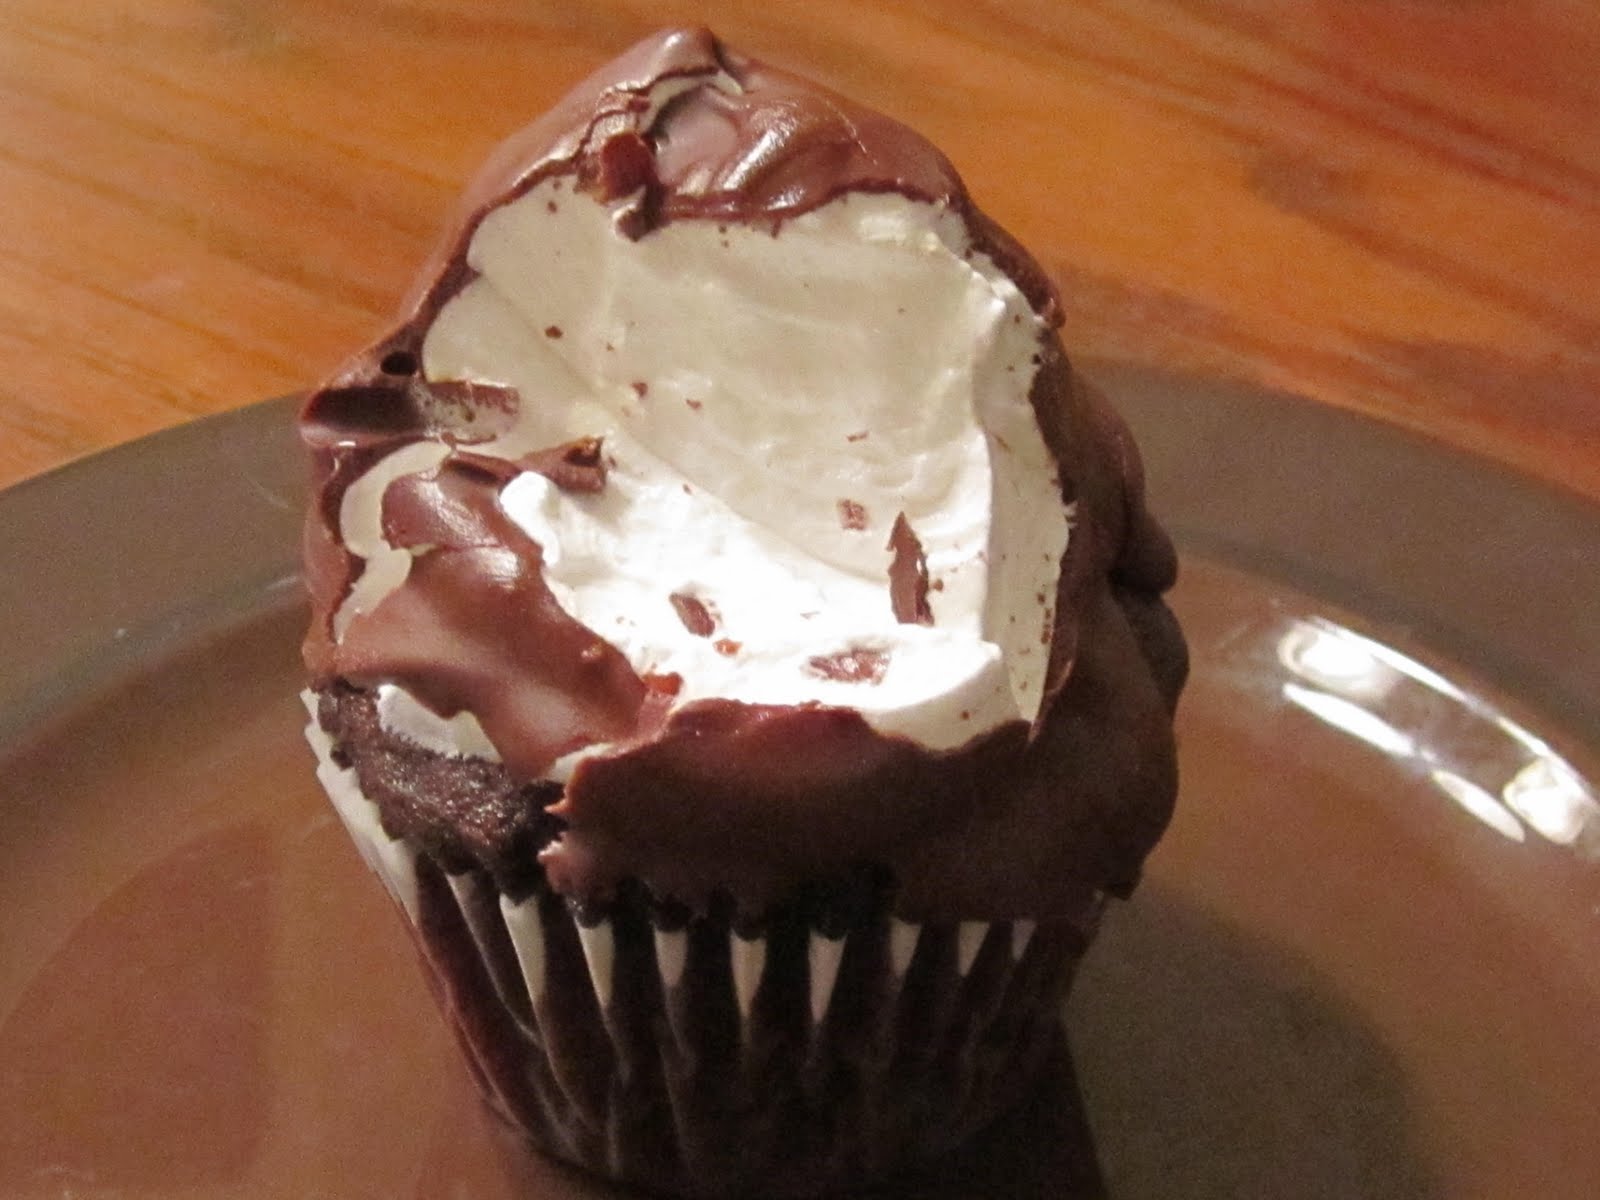 Frosted Insanity: mmmmm marshmallow fluff cupcakes